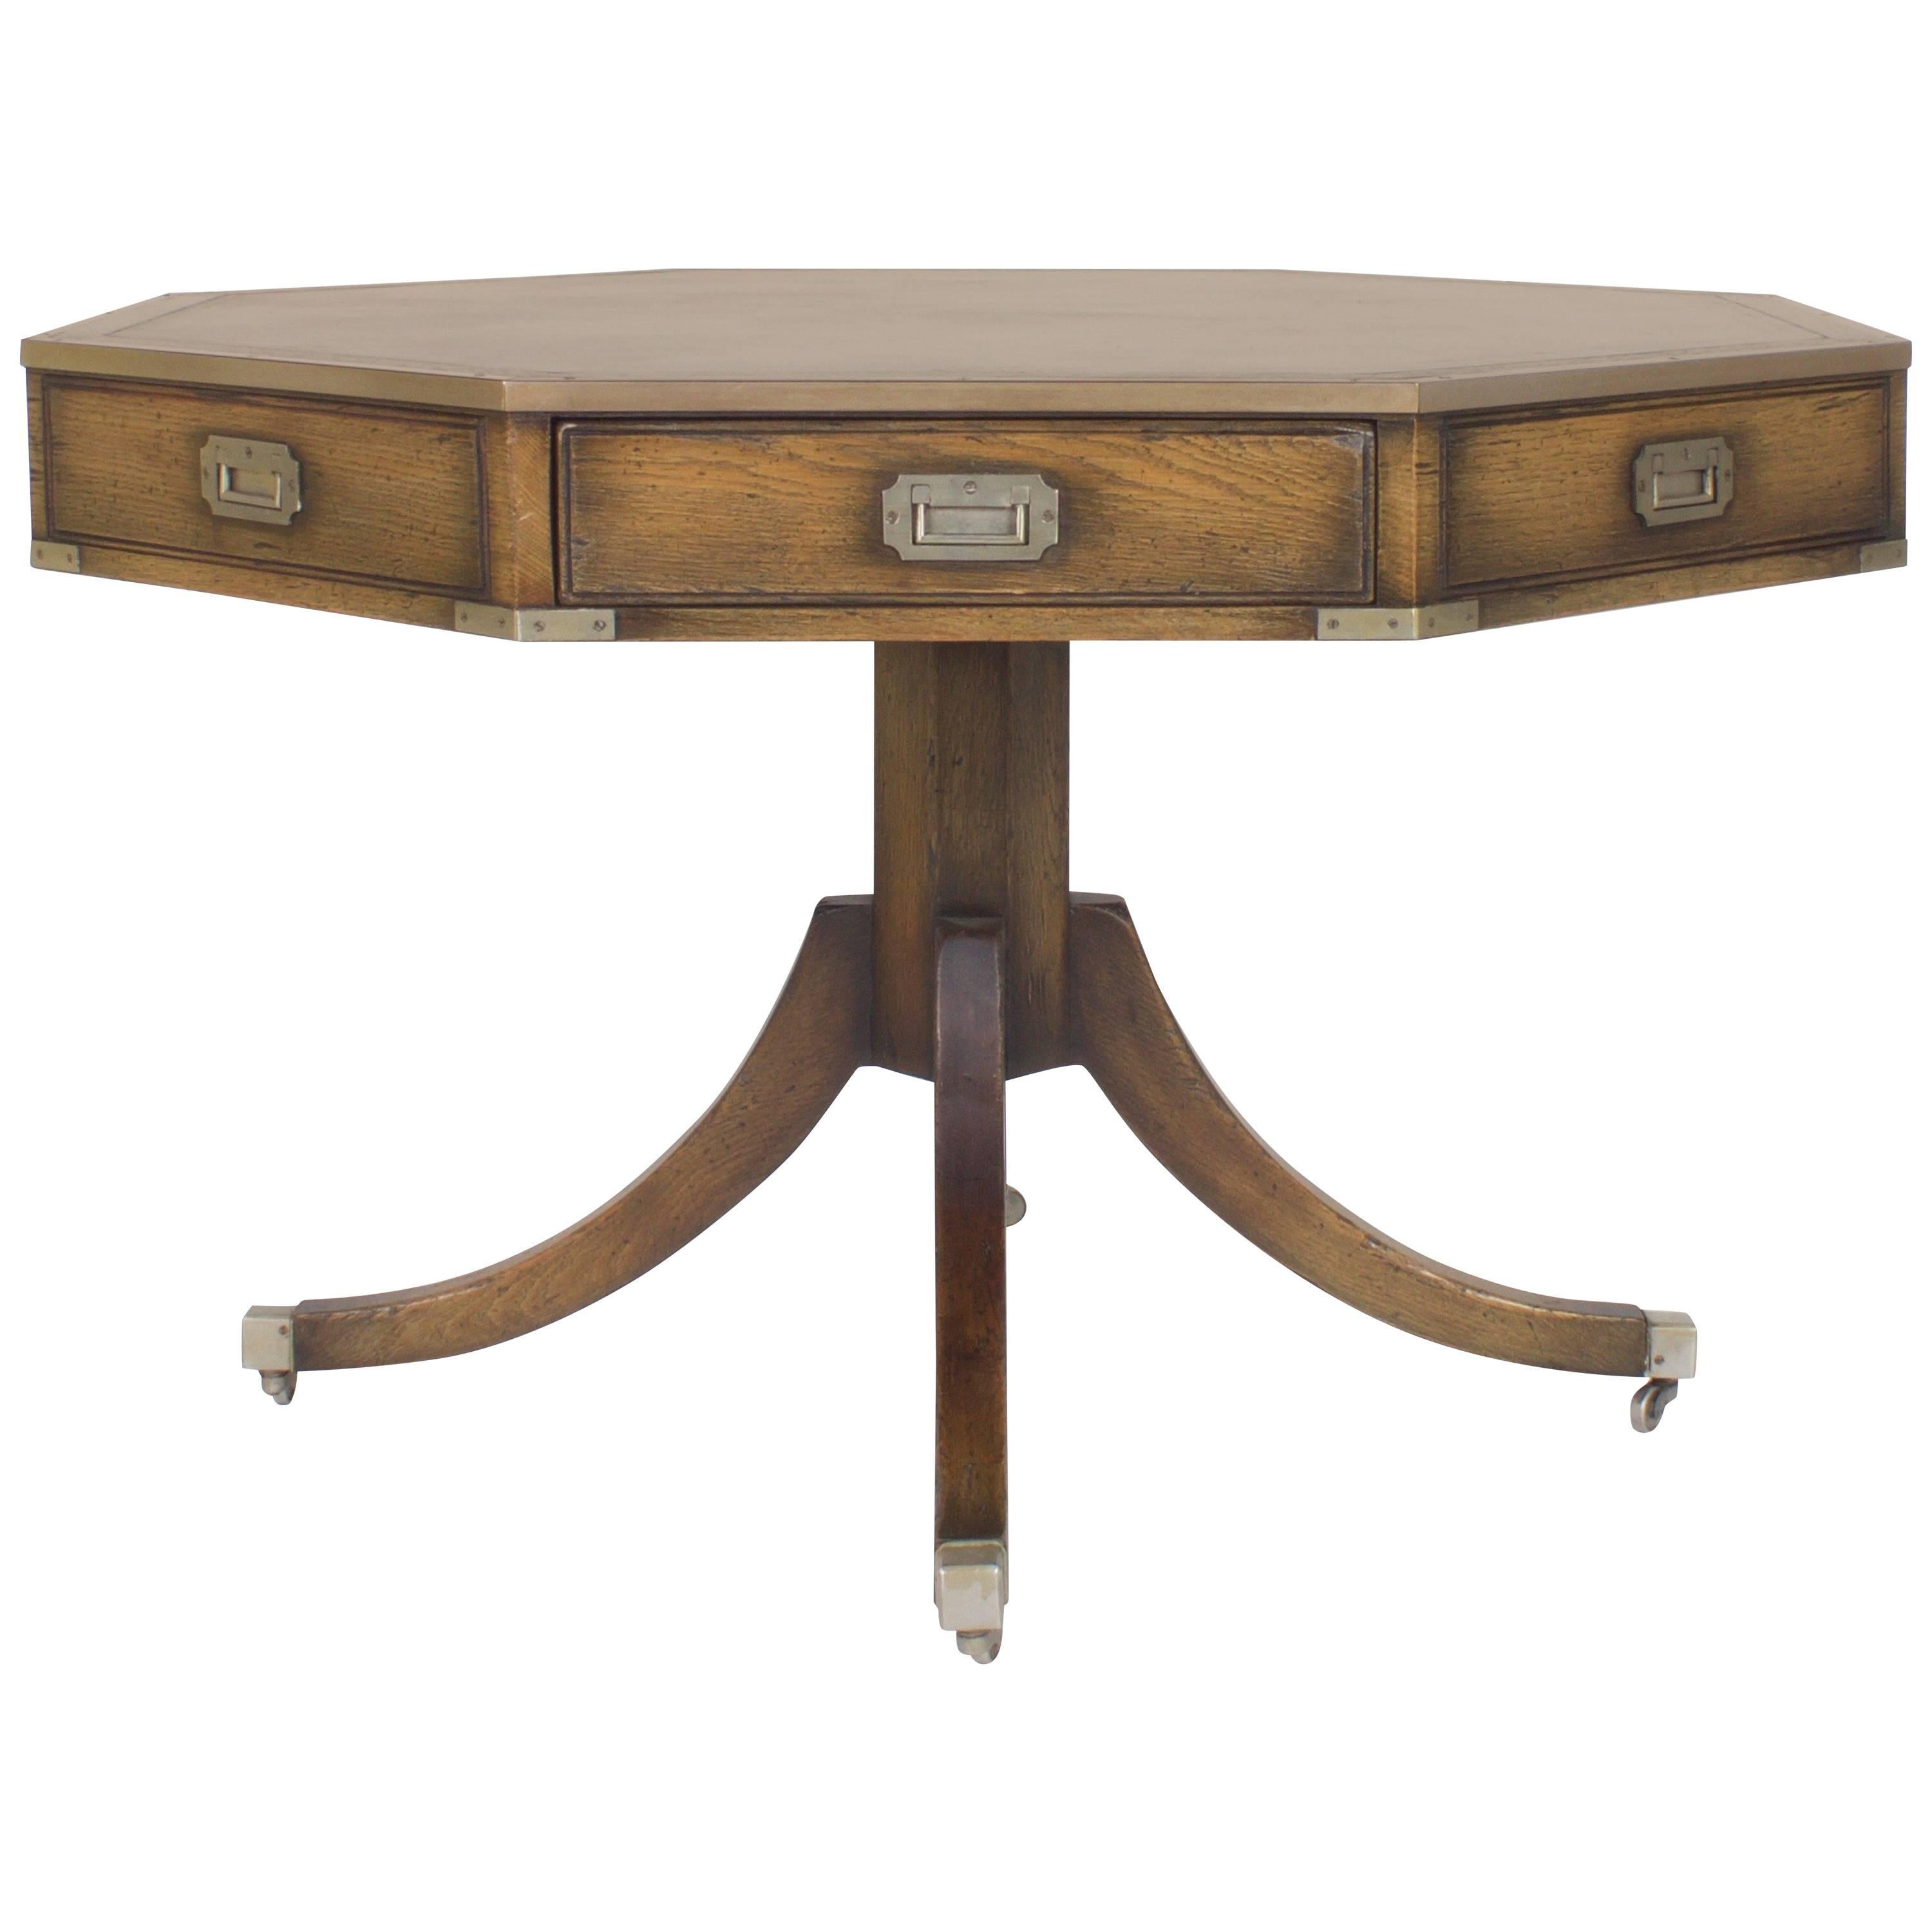 Vintage Campaign Style Center or Drum Table